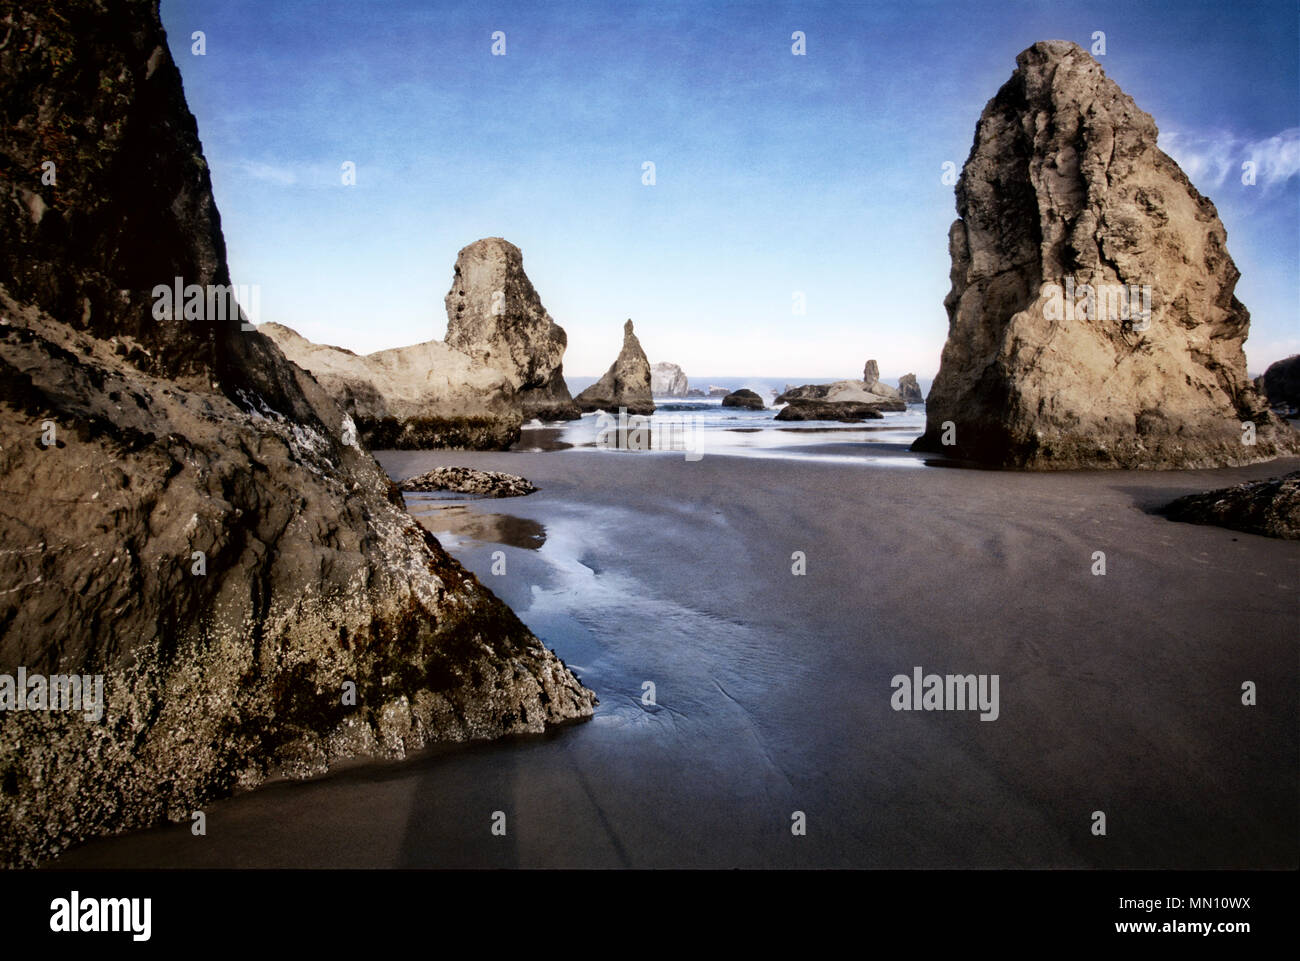 The stacks at Bandon State Natural Area exposed by low tide. Oregon. Stock Photo